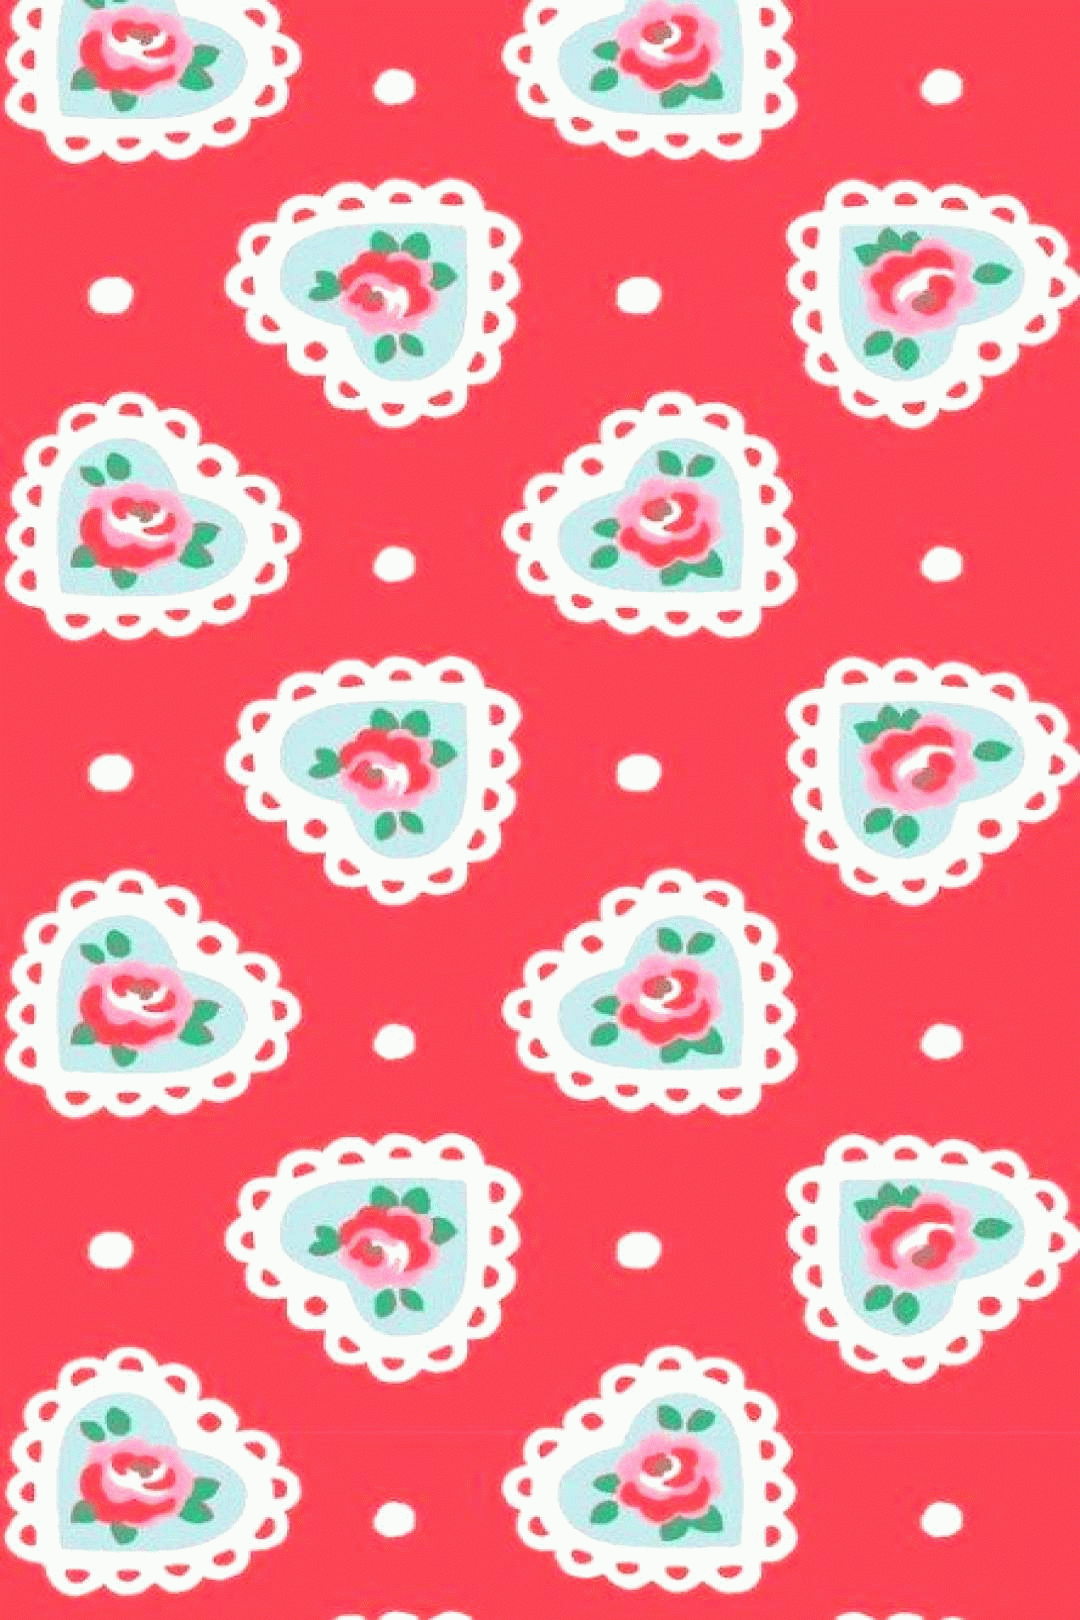 wall paper iphone vintage flowers cath kidston 15 ideas